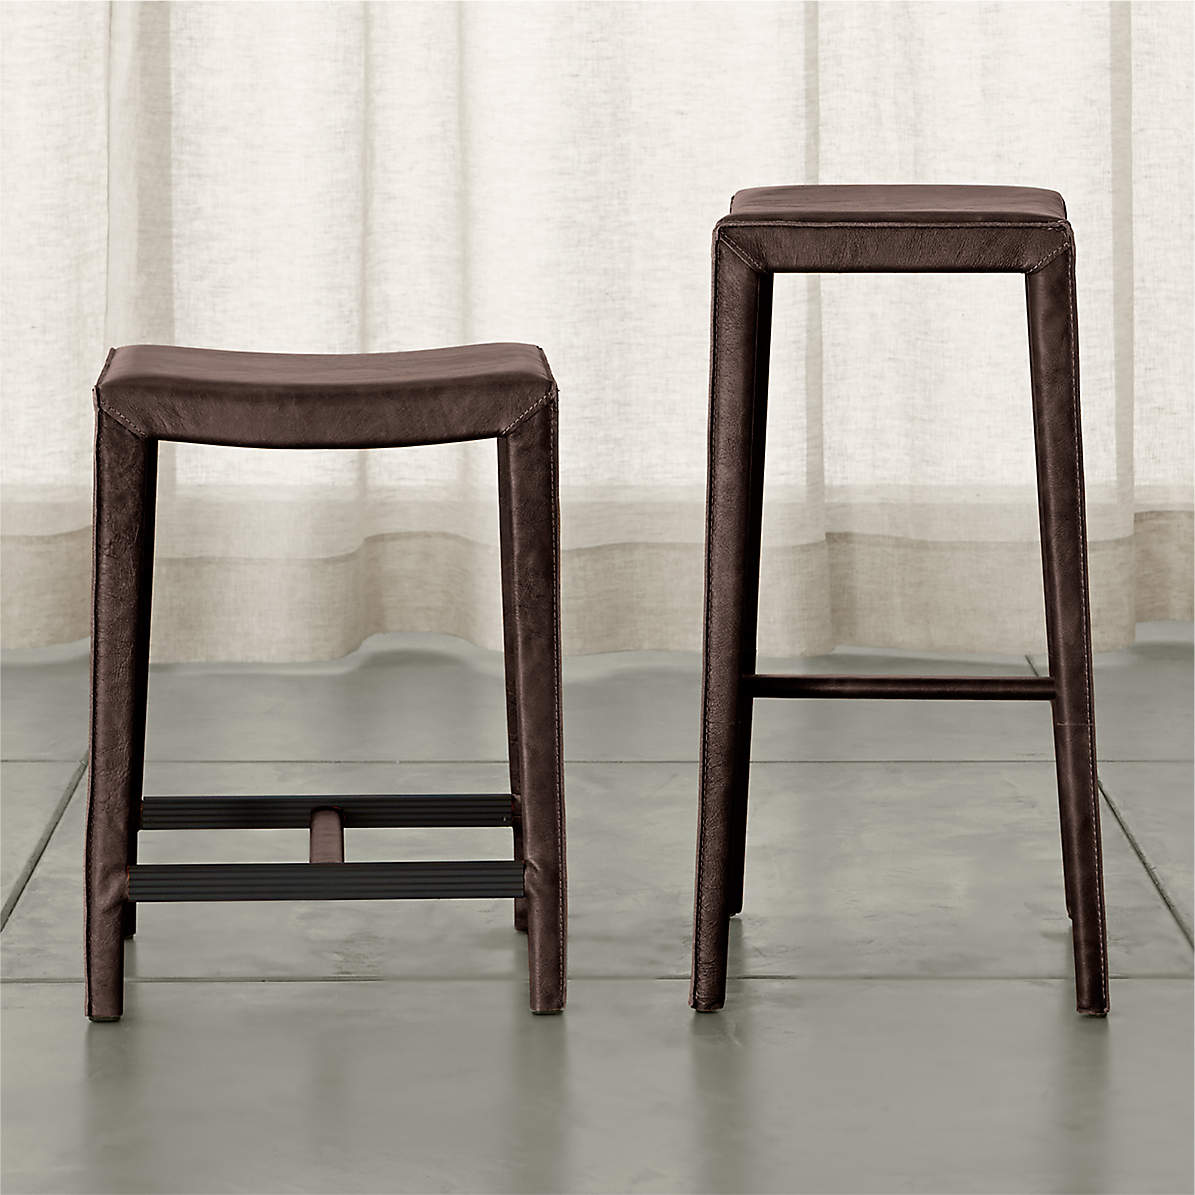 Folio Saddle Top Grain Leather Backless, Backless Leather Counter Stools